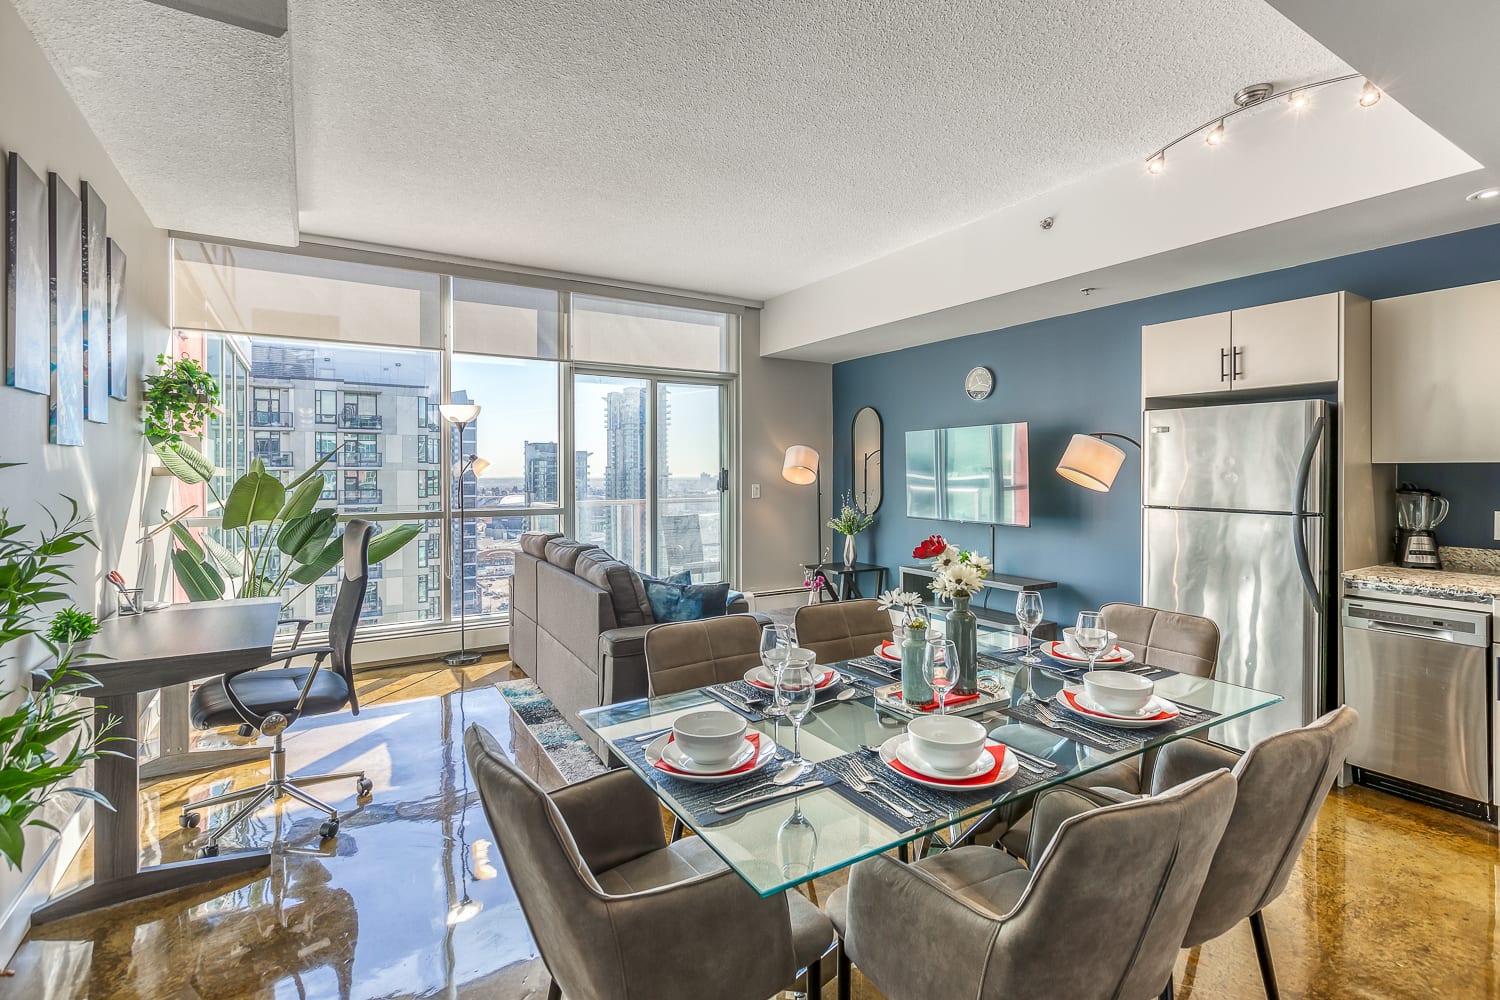 Upscale 2BR Condo King Bed Stunning City Views